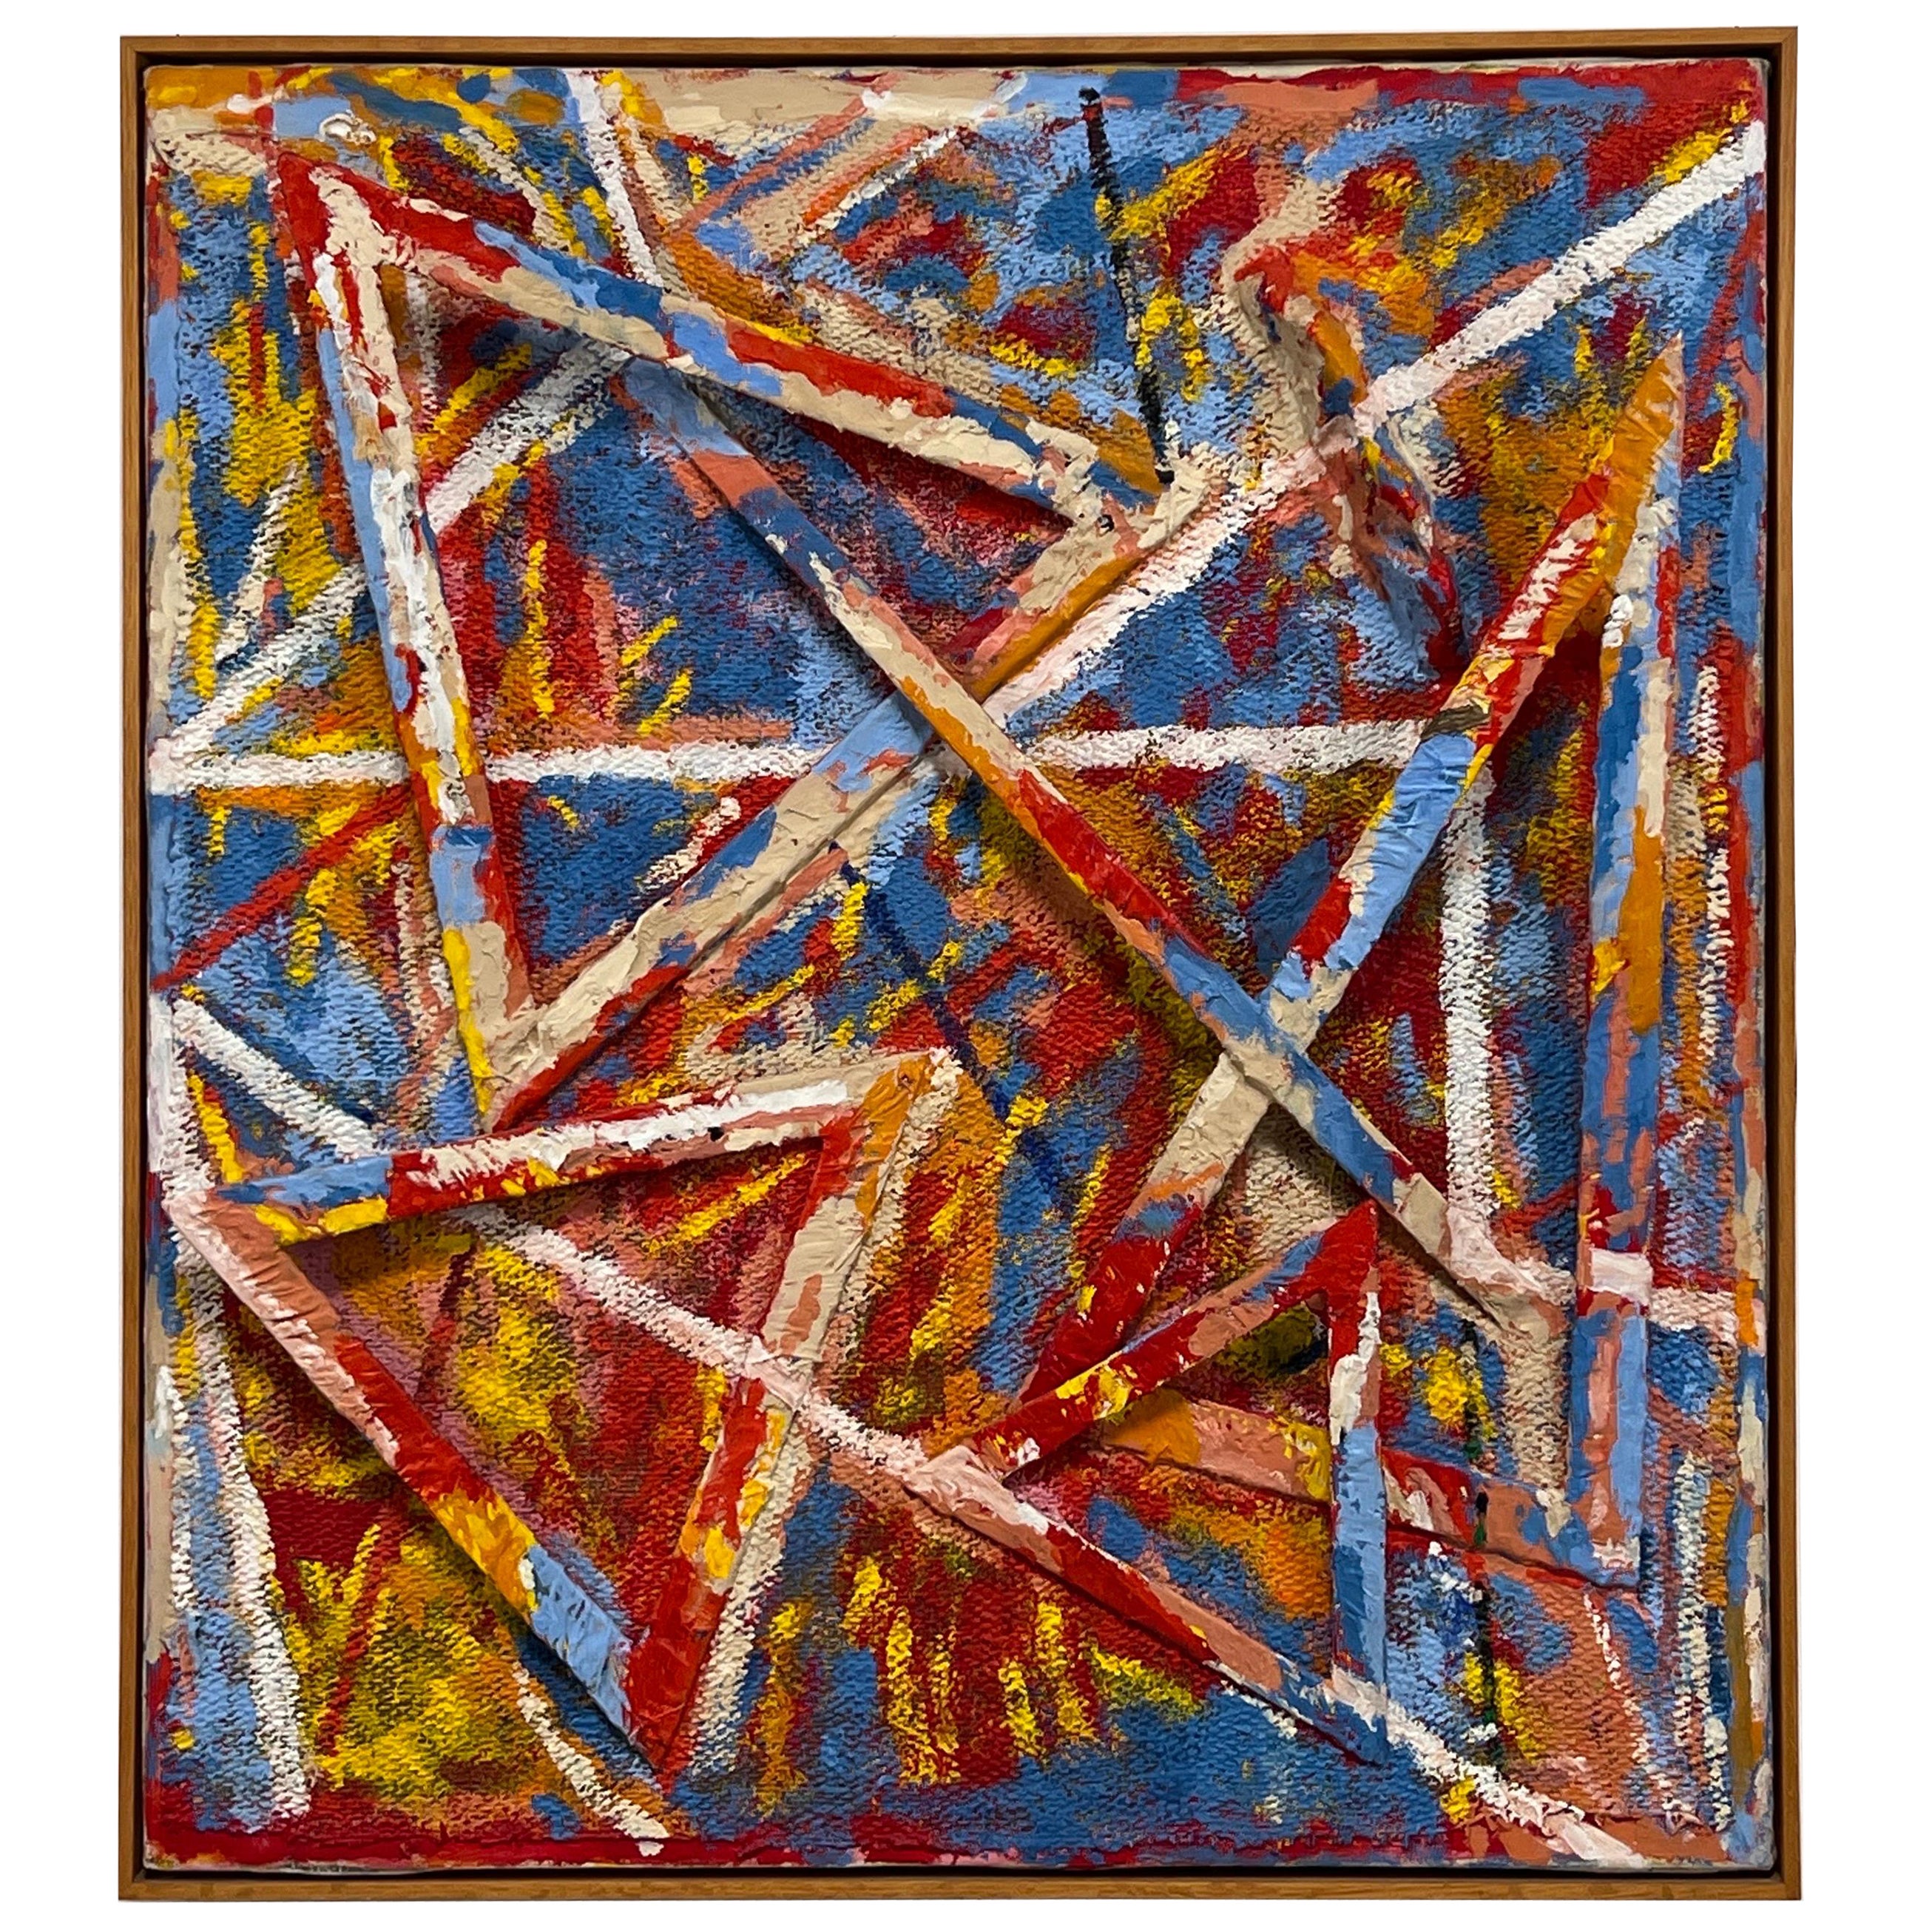 Doing the Best I Can, 3D Abstraction by Danny Williams For Sale